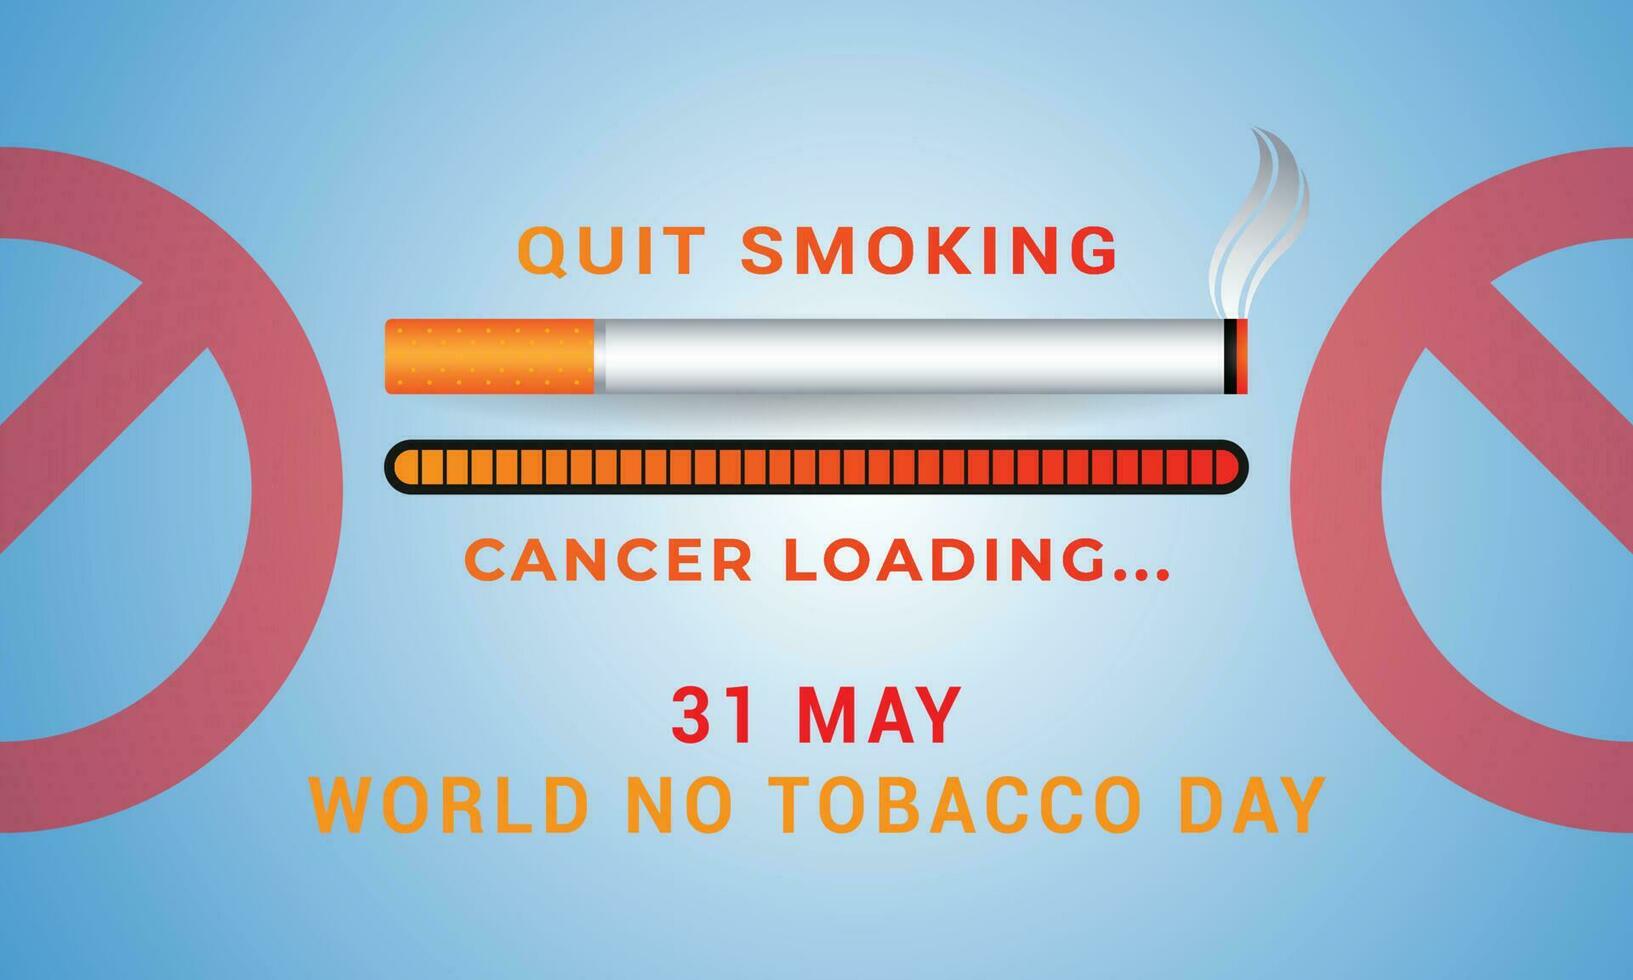 Quit smoking, cancer loading, world no tobacco day with cigarette and forbidden sign awareness post banner design template vector